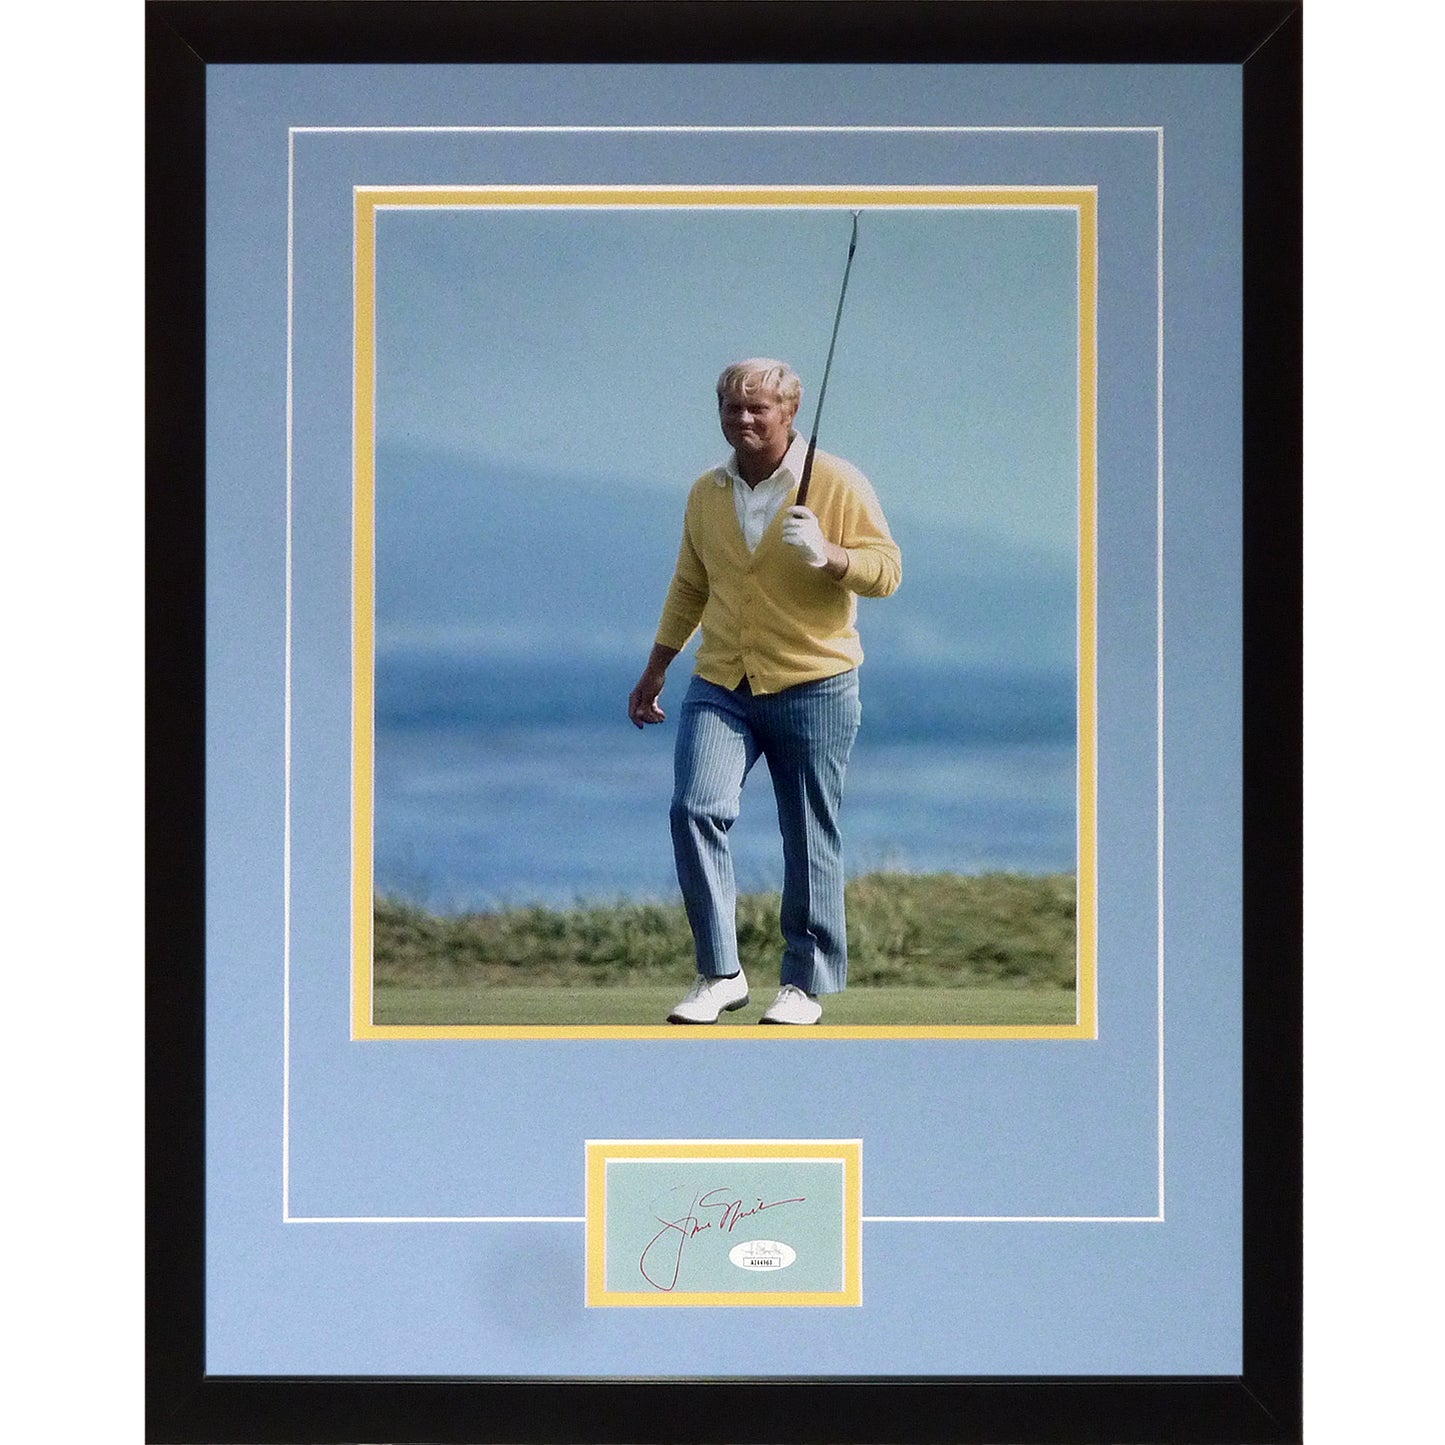 JACK NICKLAUS Autographed US Open (Pebble Beach) Deluxe Framed 11x14 Piece